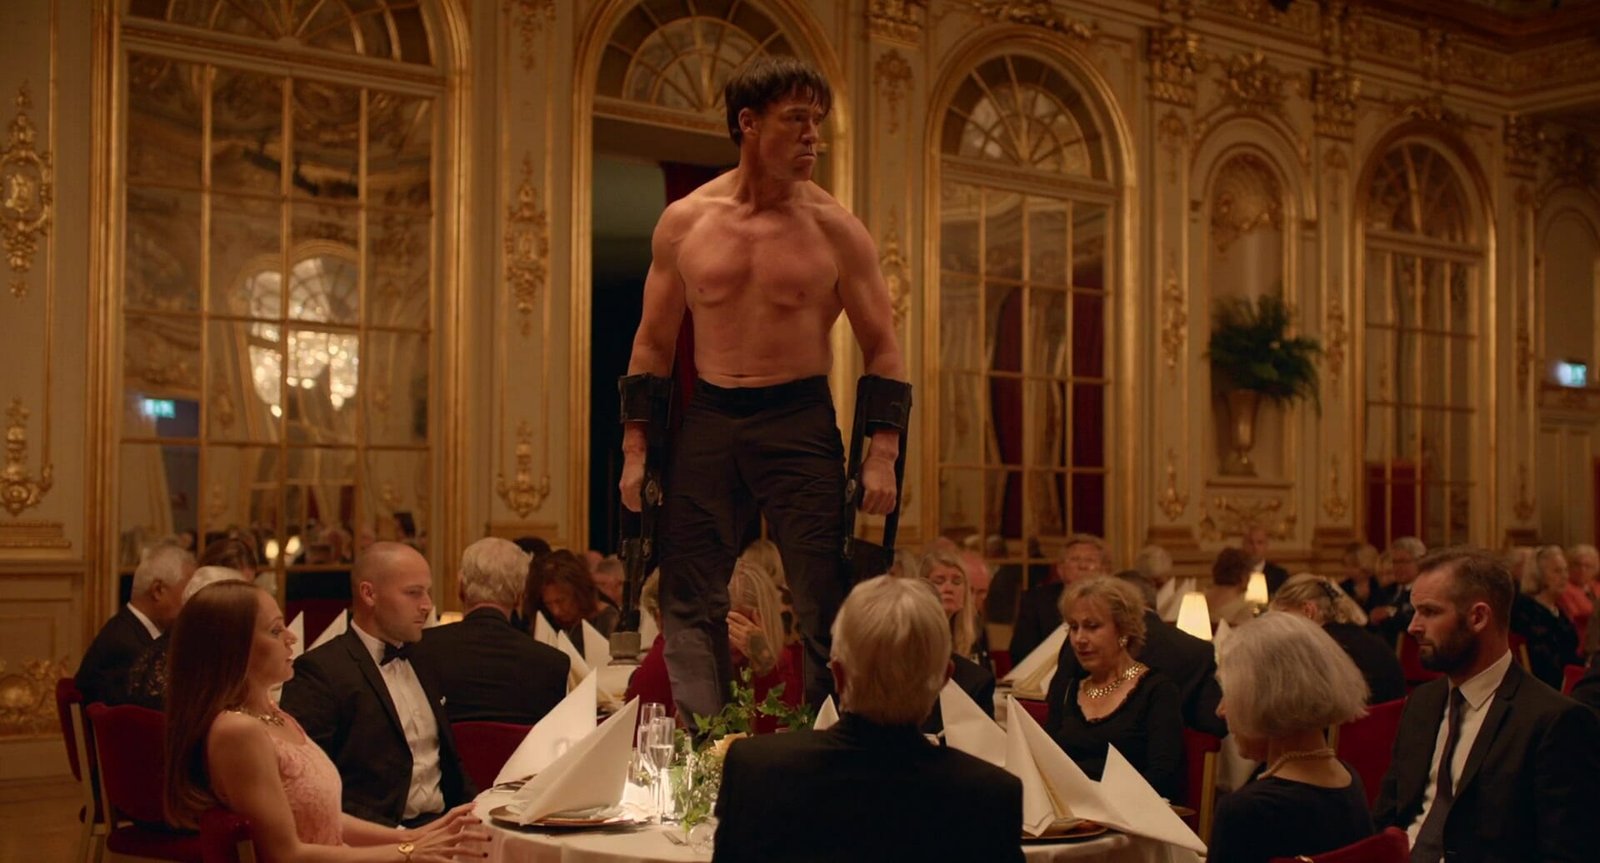 Best movies on Hulu: The Square